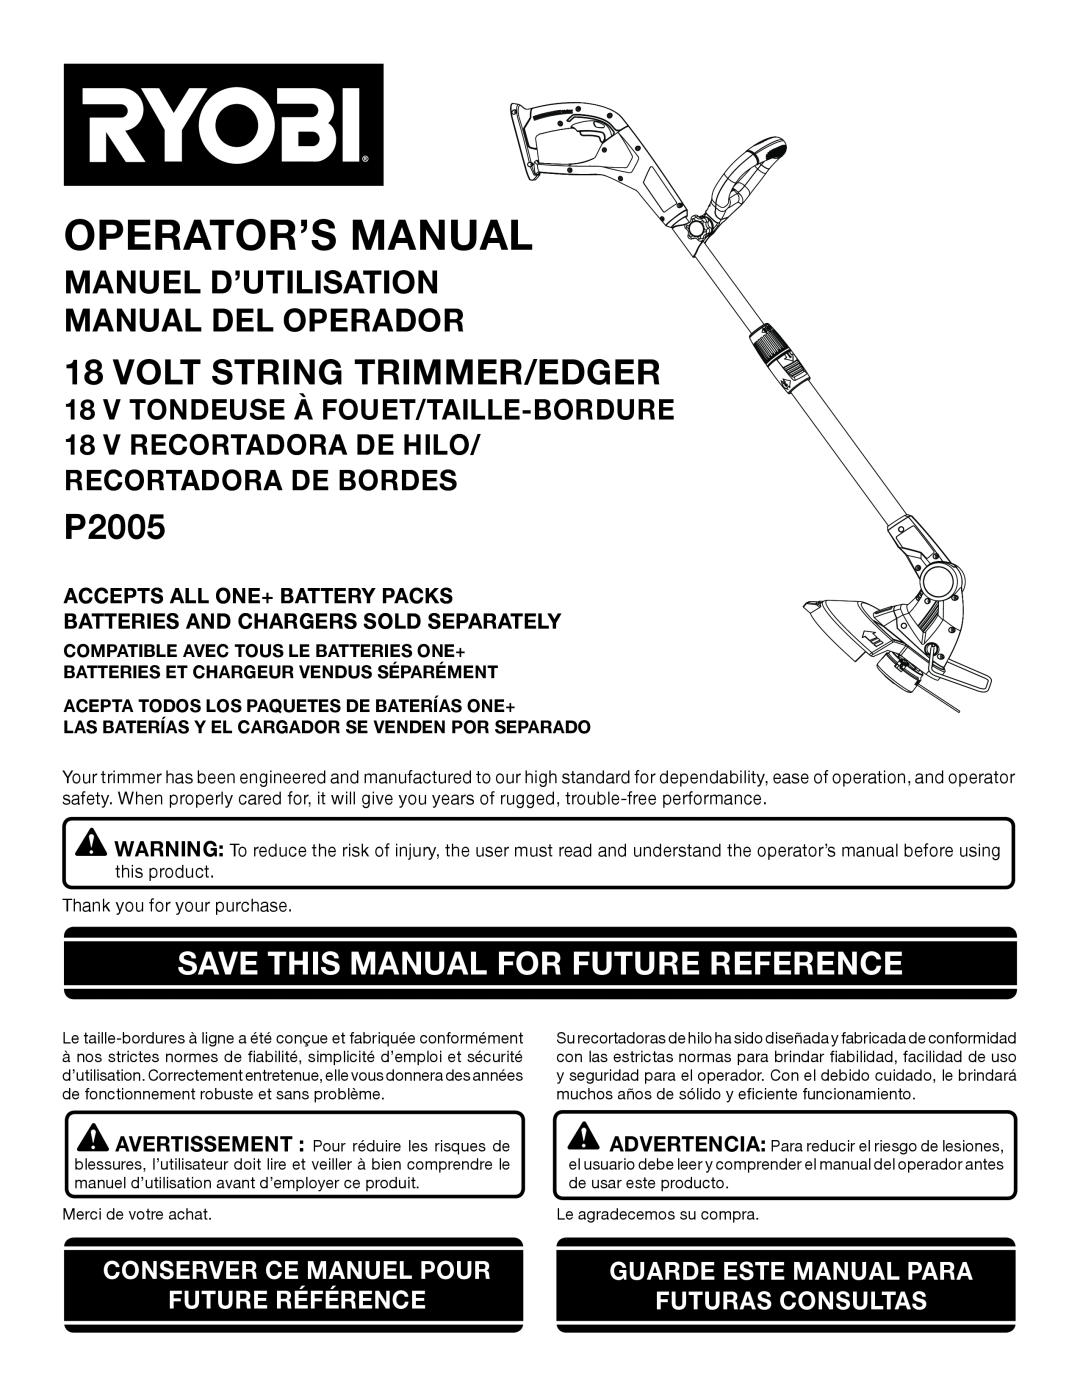 Ryobi P2005 manuel dutilisation Volt String Trimmer/Edger, Save This Manual For Future Reference, Operator’S Manual 